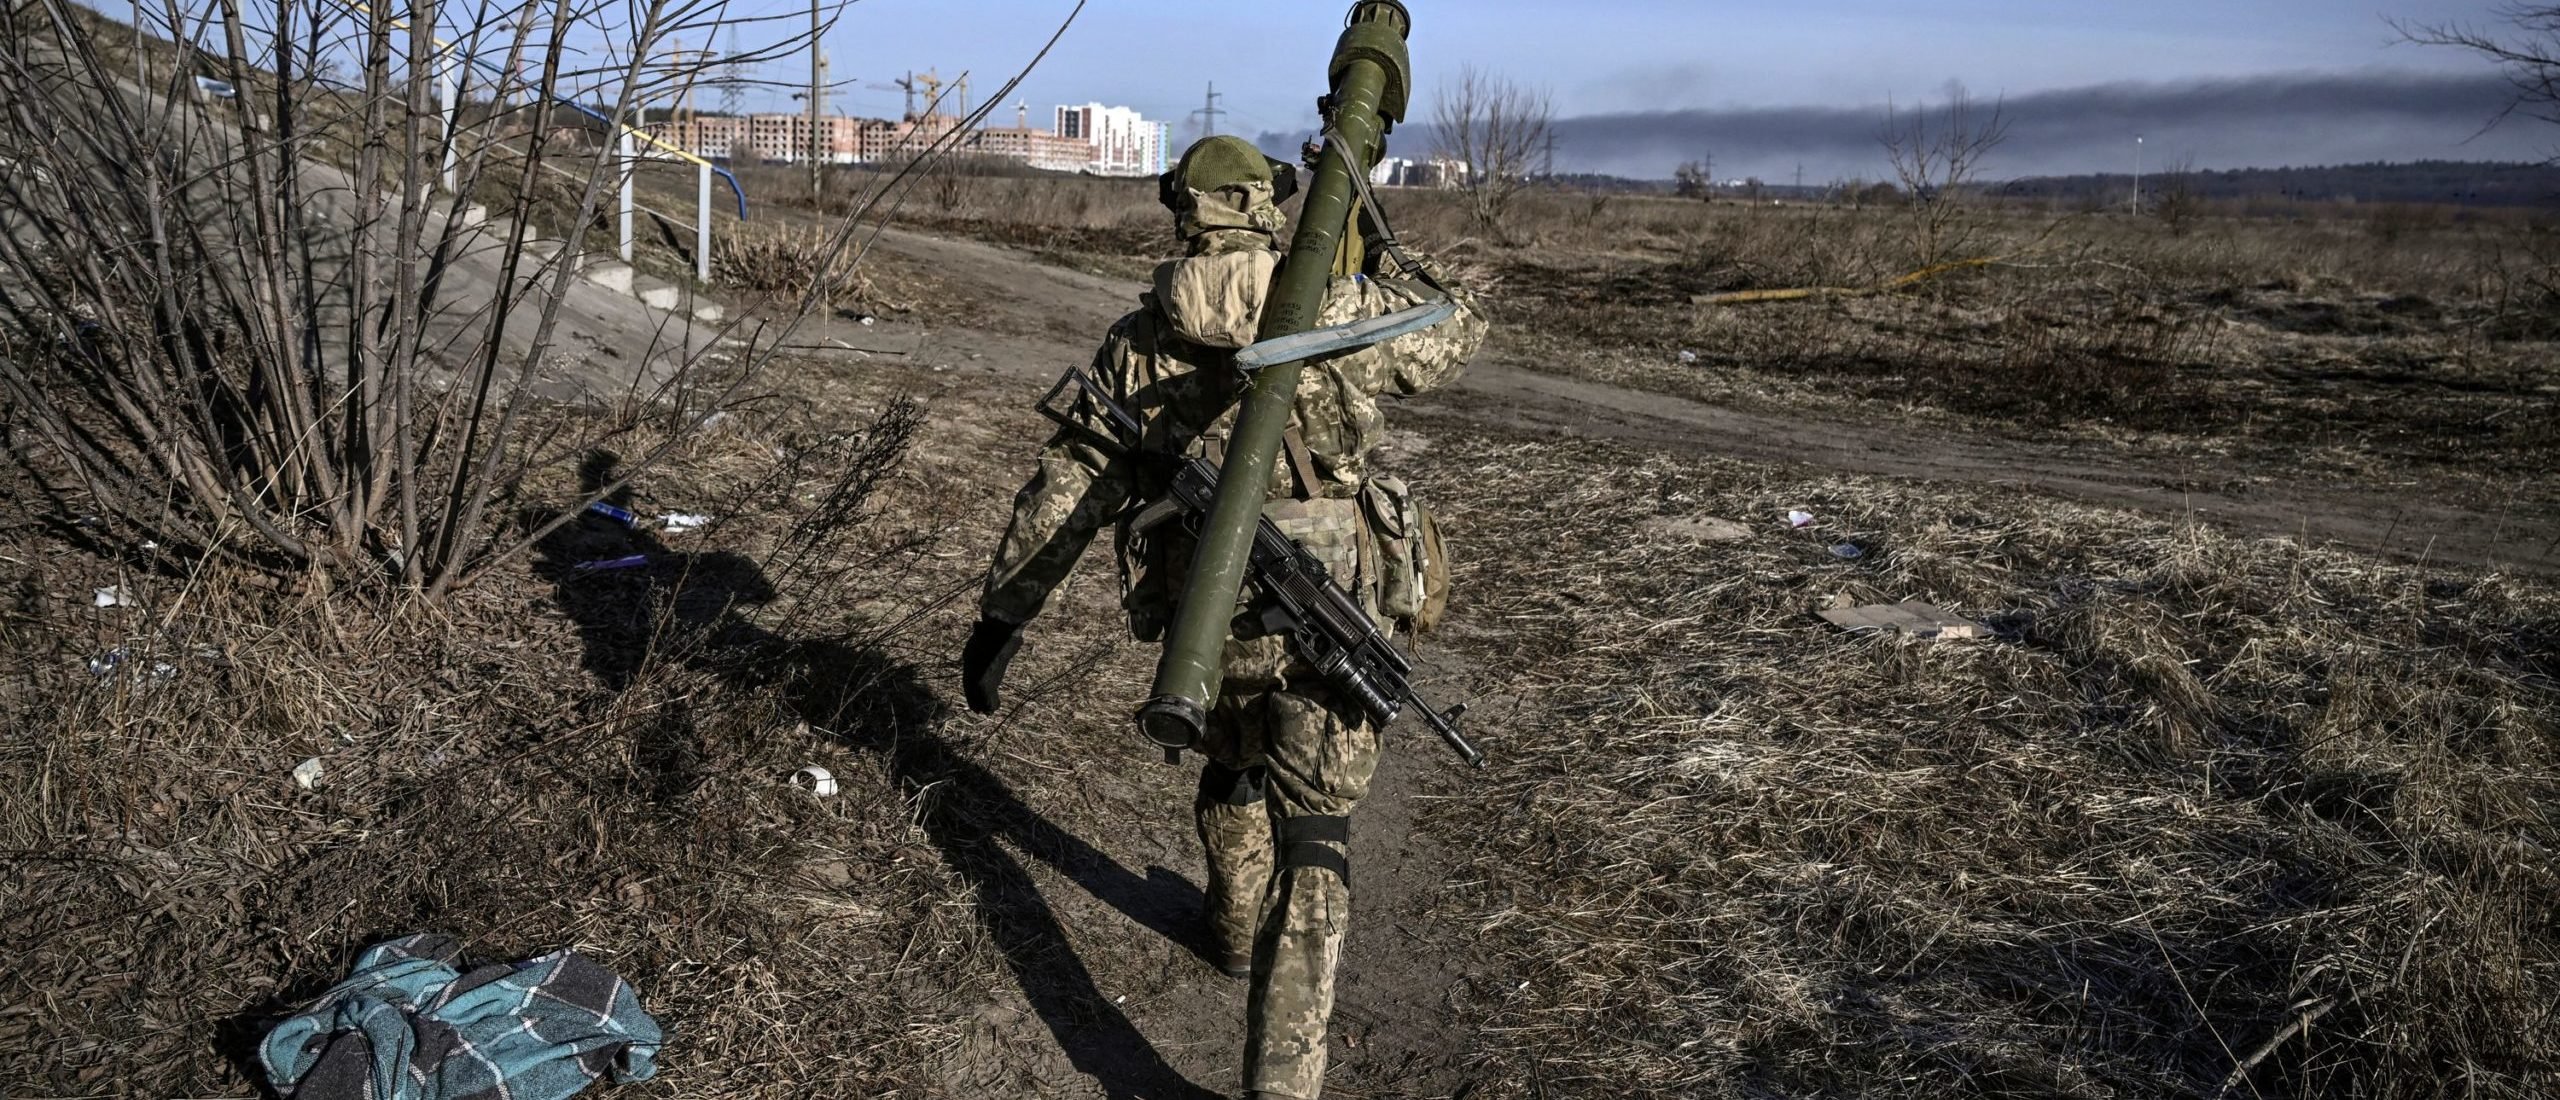 Russia Strikes Ukraine Port City Of Mariupol, Hits Mosque Sheltering People | The Daily Caller